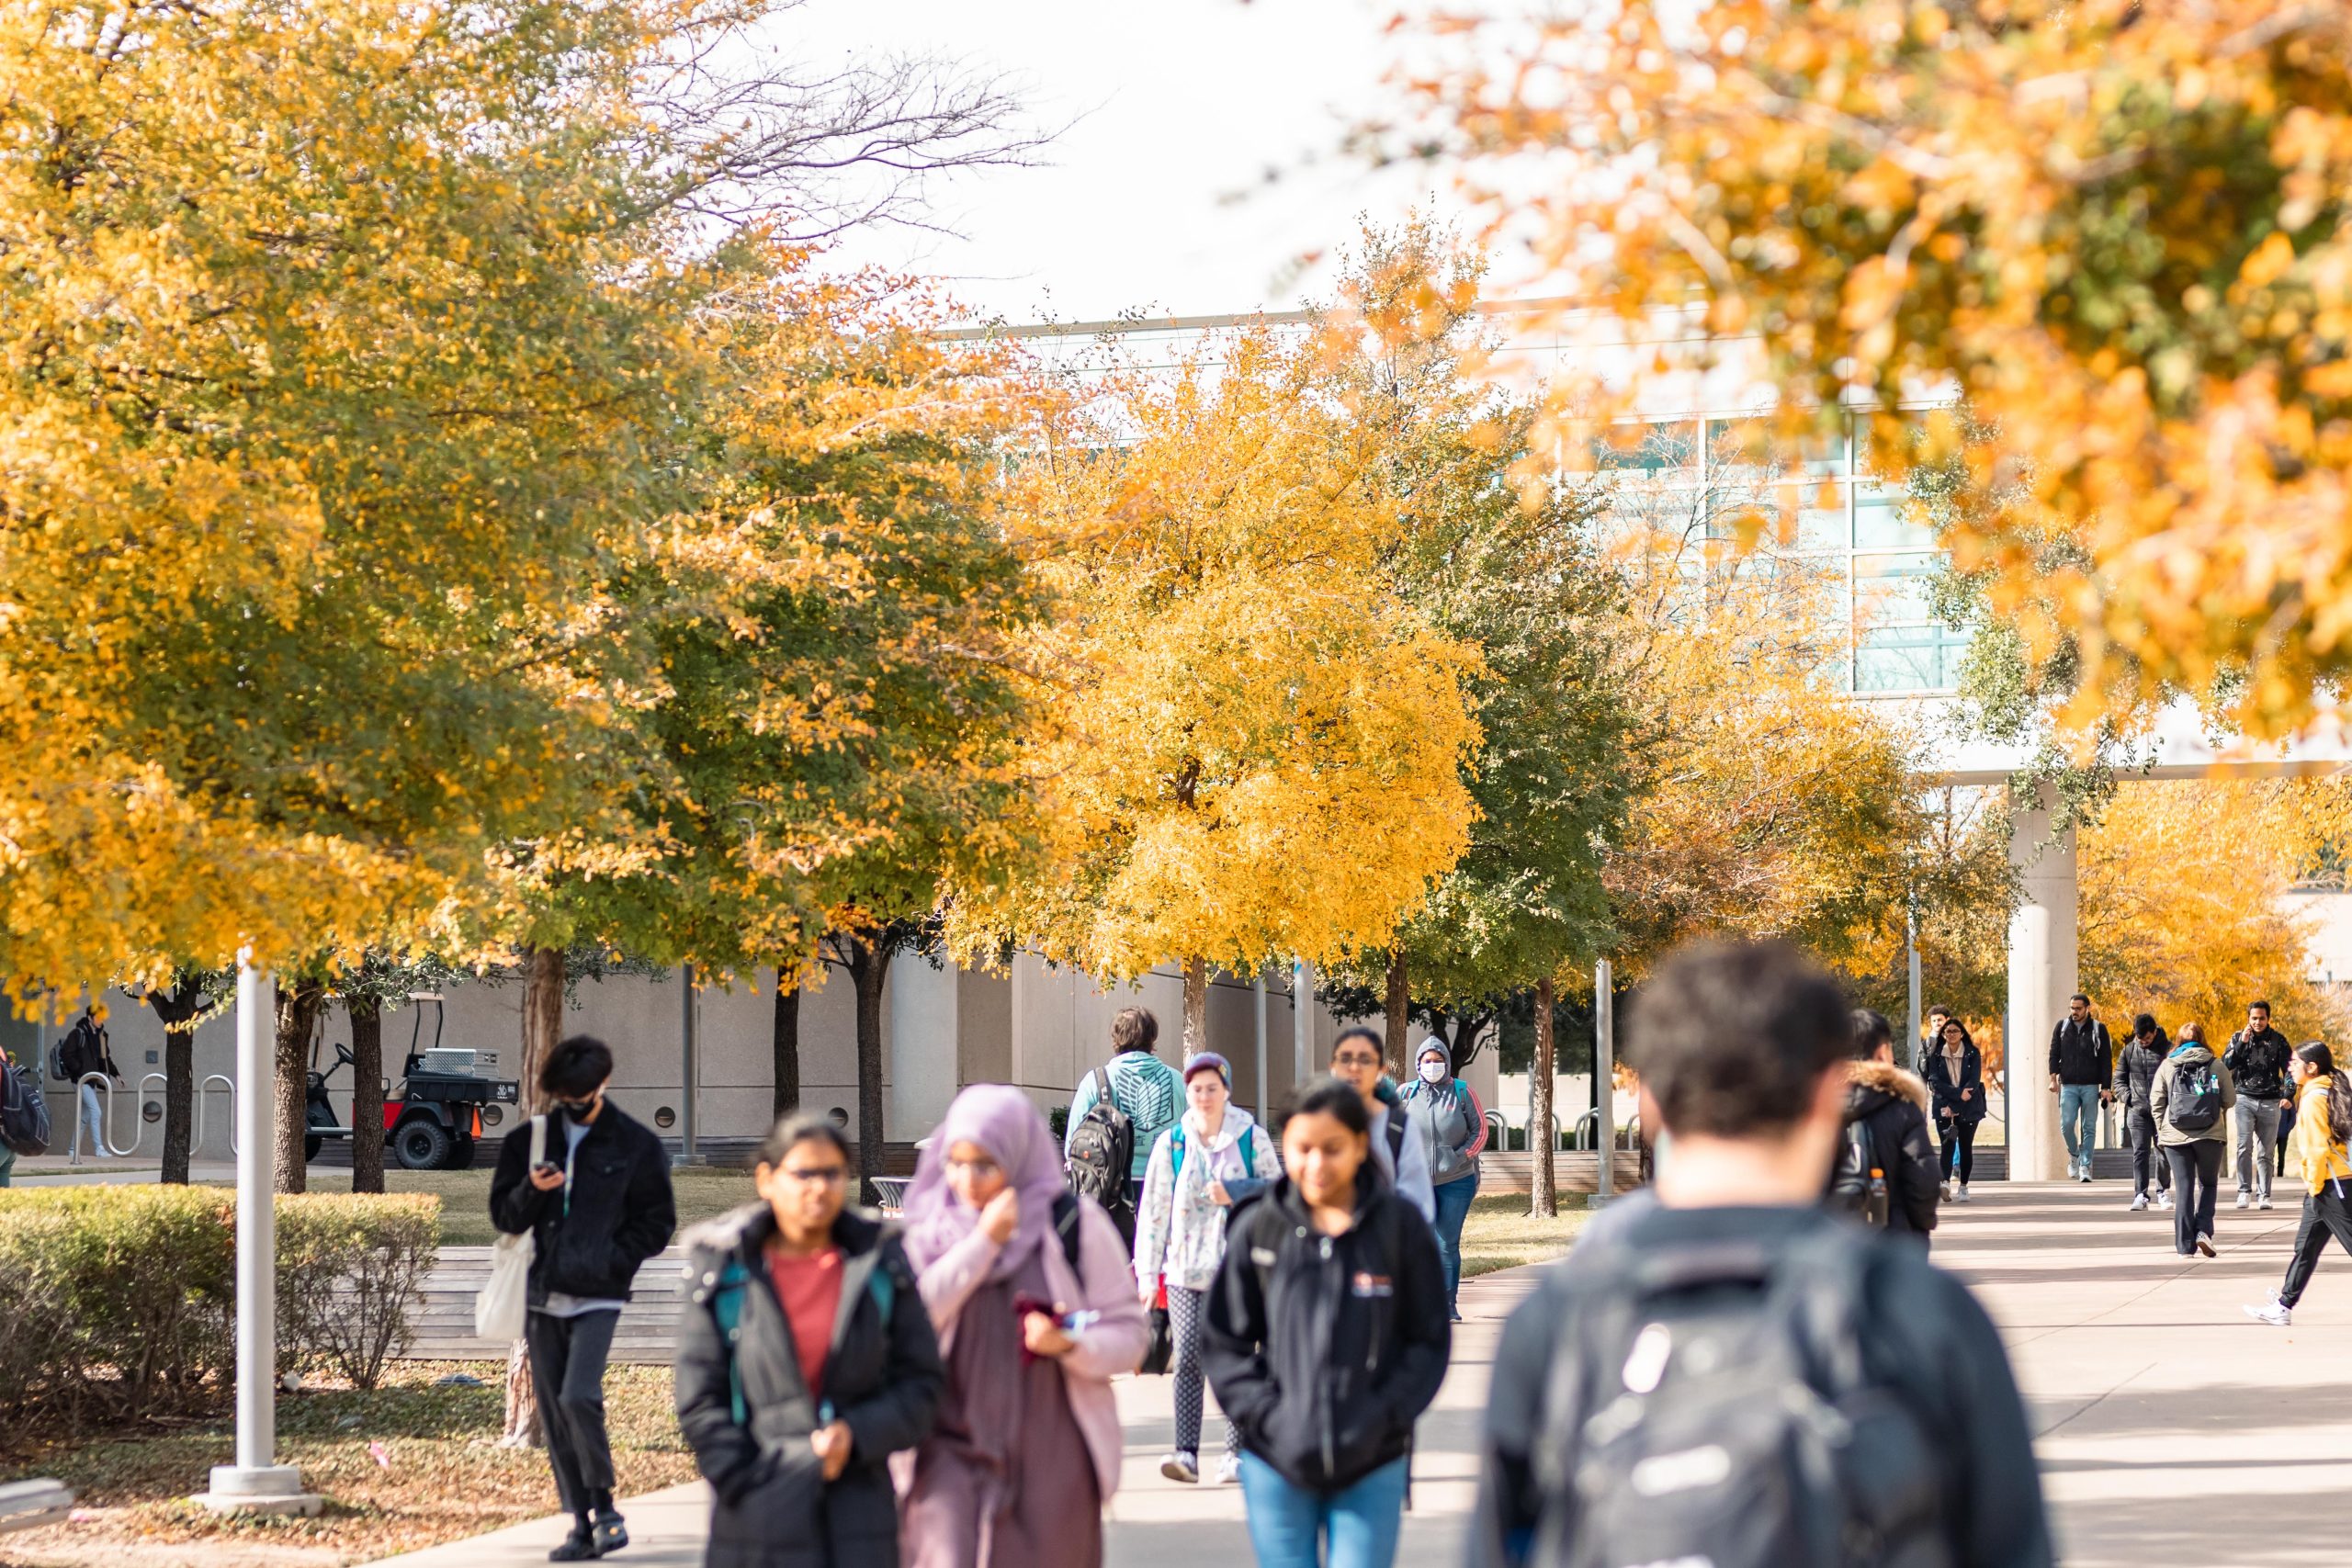 Students walking on the campus 